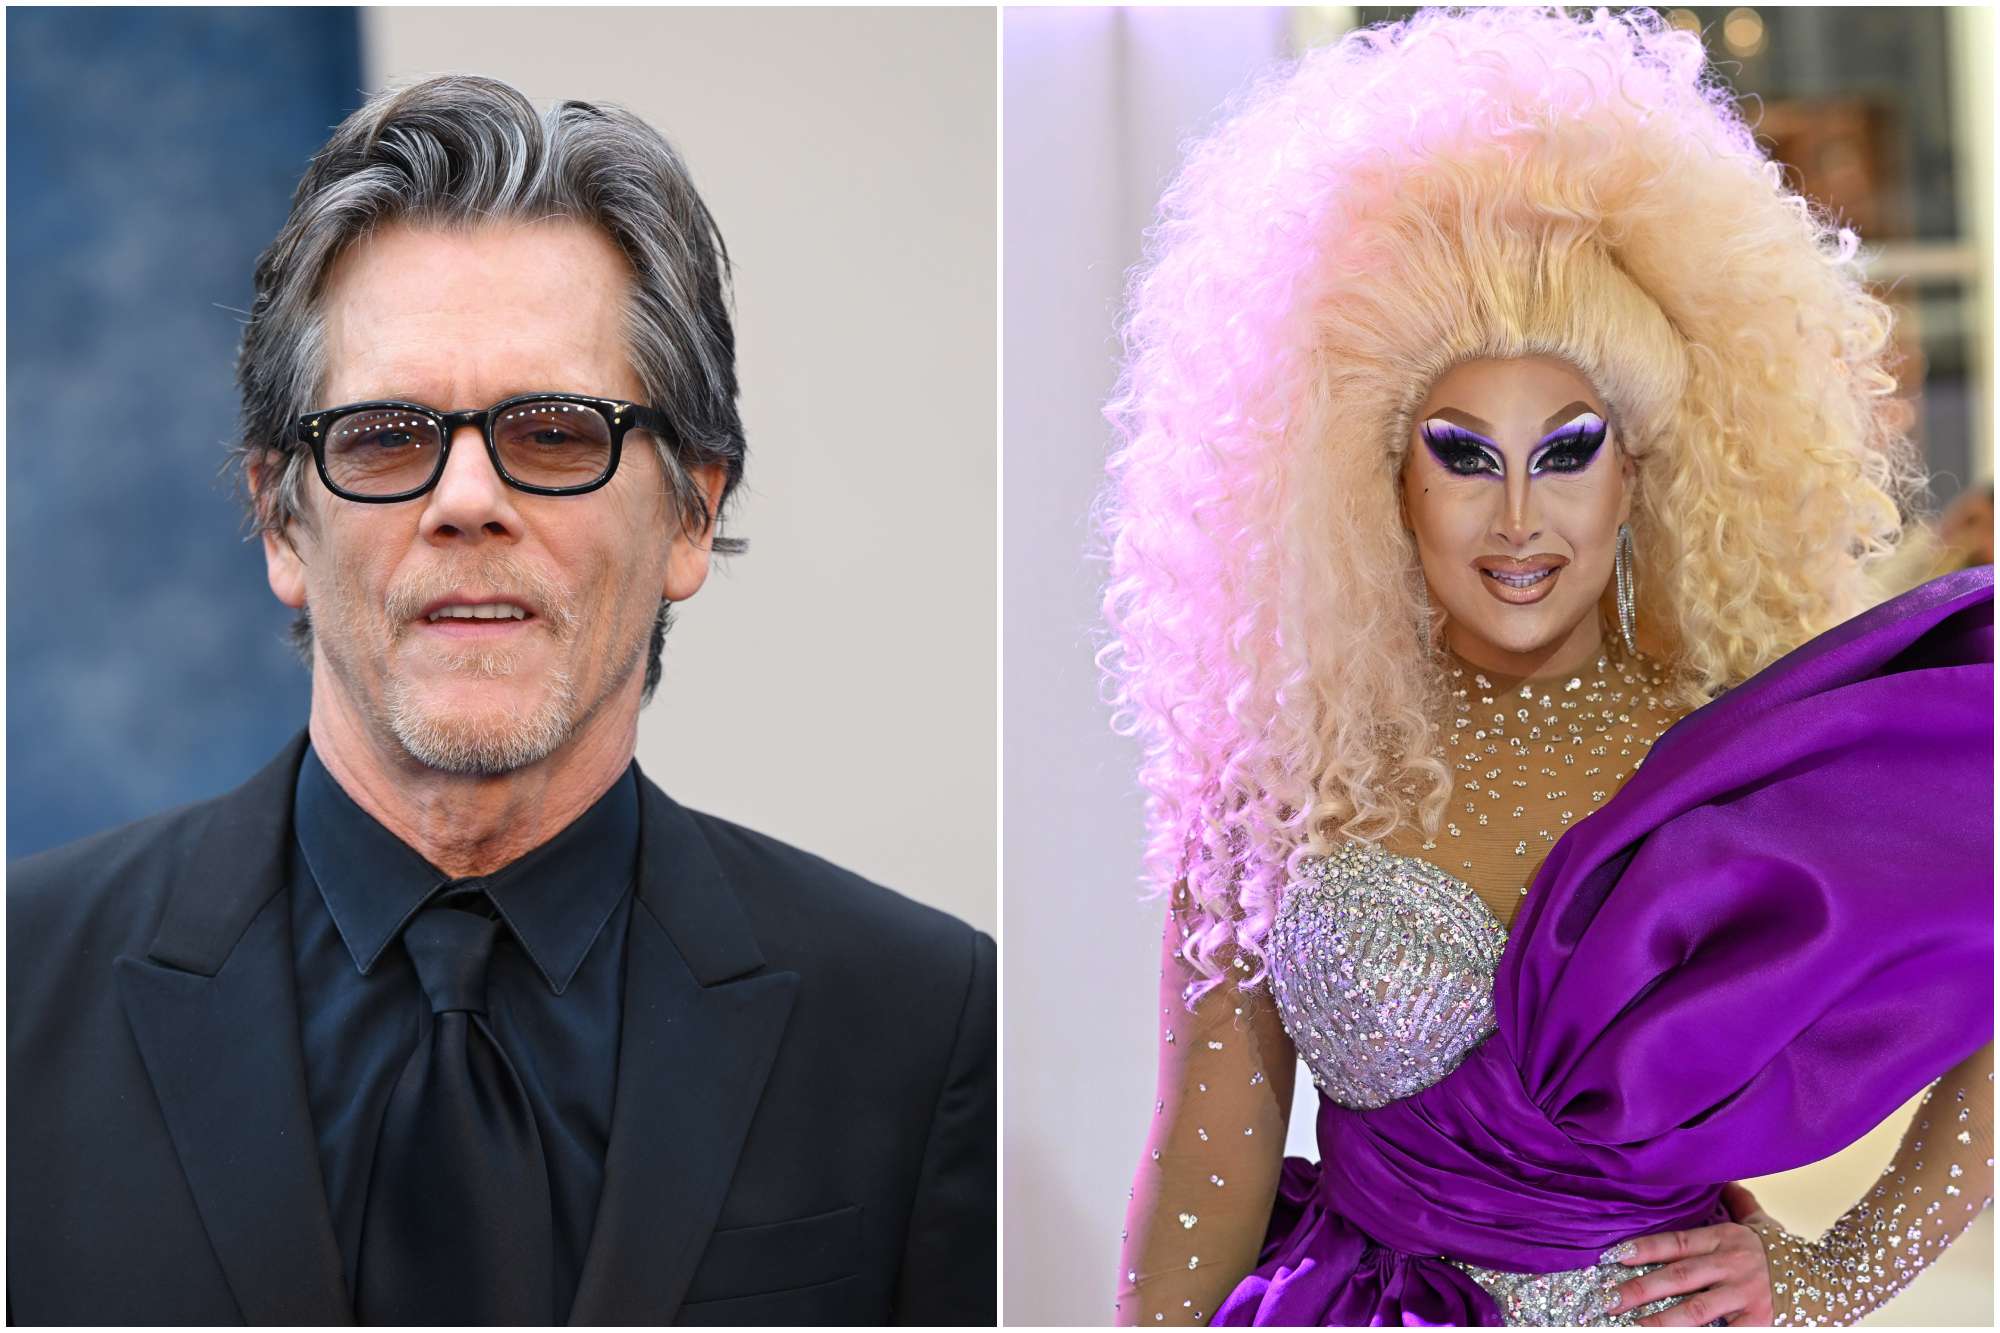 'RuPaul's Drag Race' Kevin Bacon and Loosey LaDuca. Bacon smiling wearing black glasses on the left and Loosey wearing a silver and purple costume with her hand on her hip on the right.